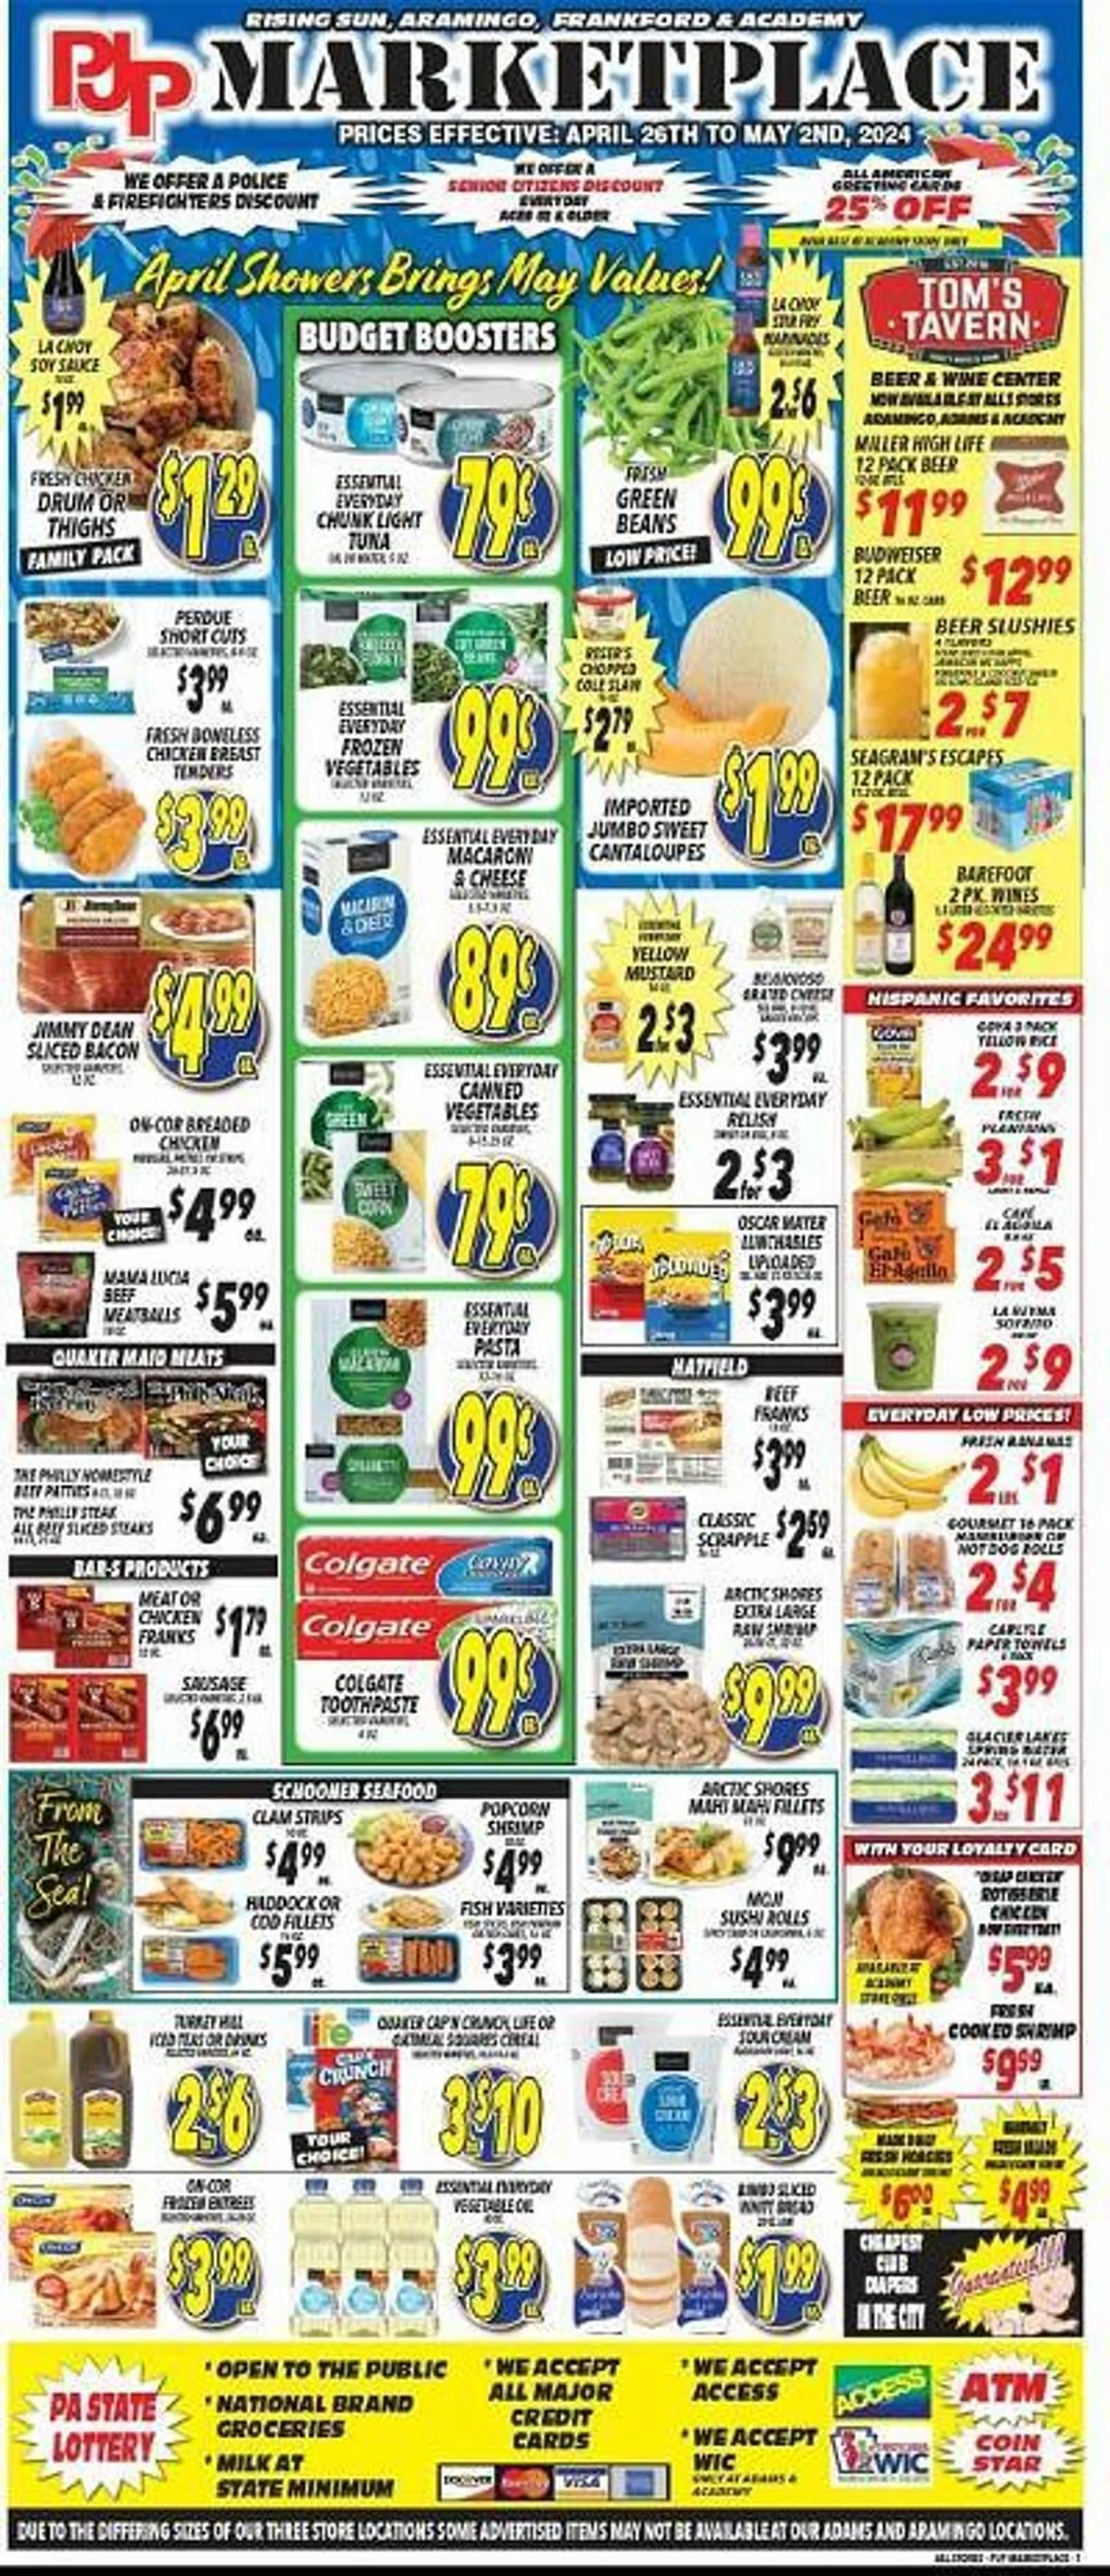 PJP Marketplace Weekly Ad - 1